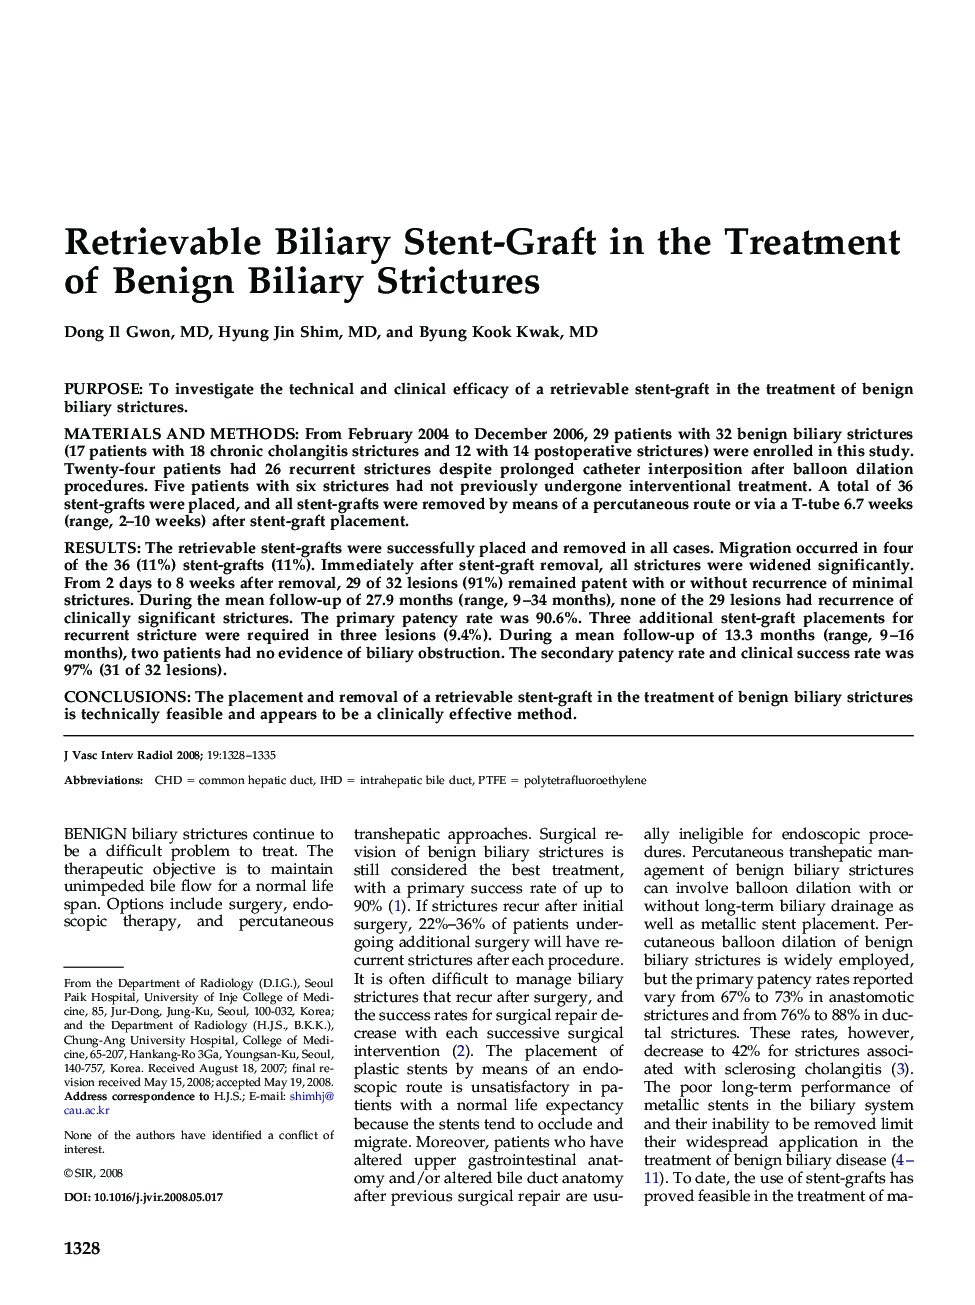 Retrievable Biliary Stent-Graft in the Treatment of Benign Biliary Strictures